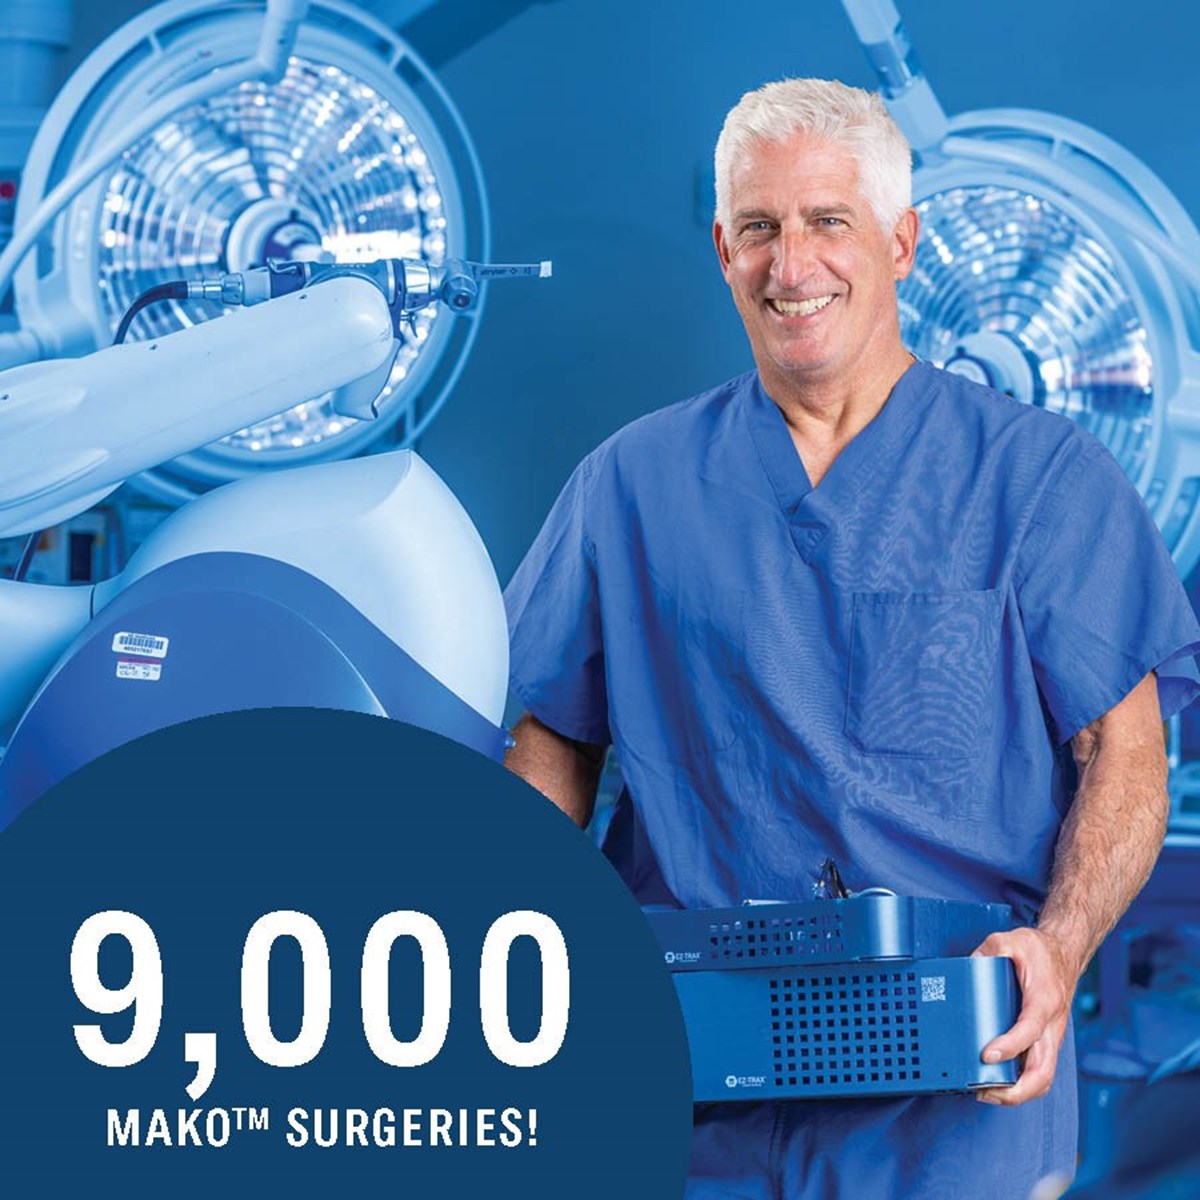 Dr. Bob Marchand Achieves Robotic-Assisted Surgery Milestone